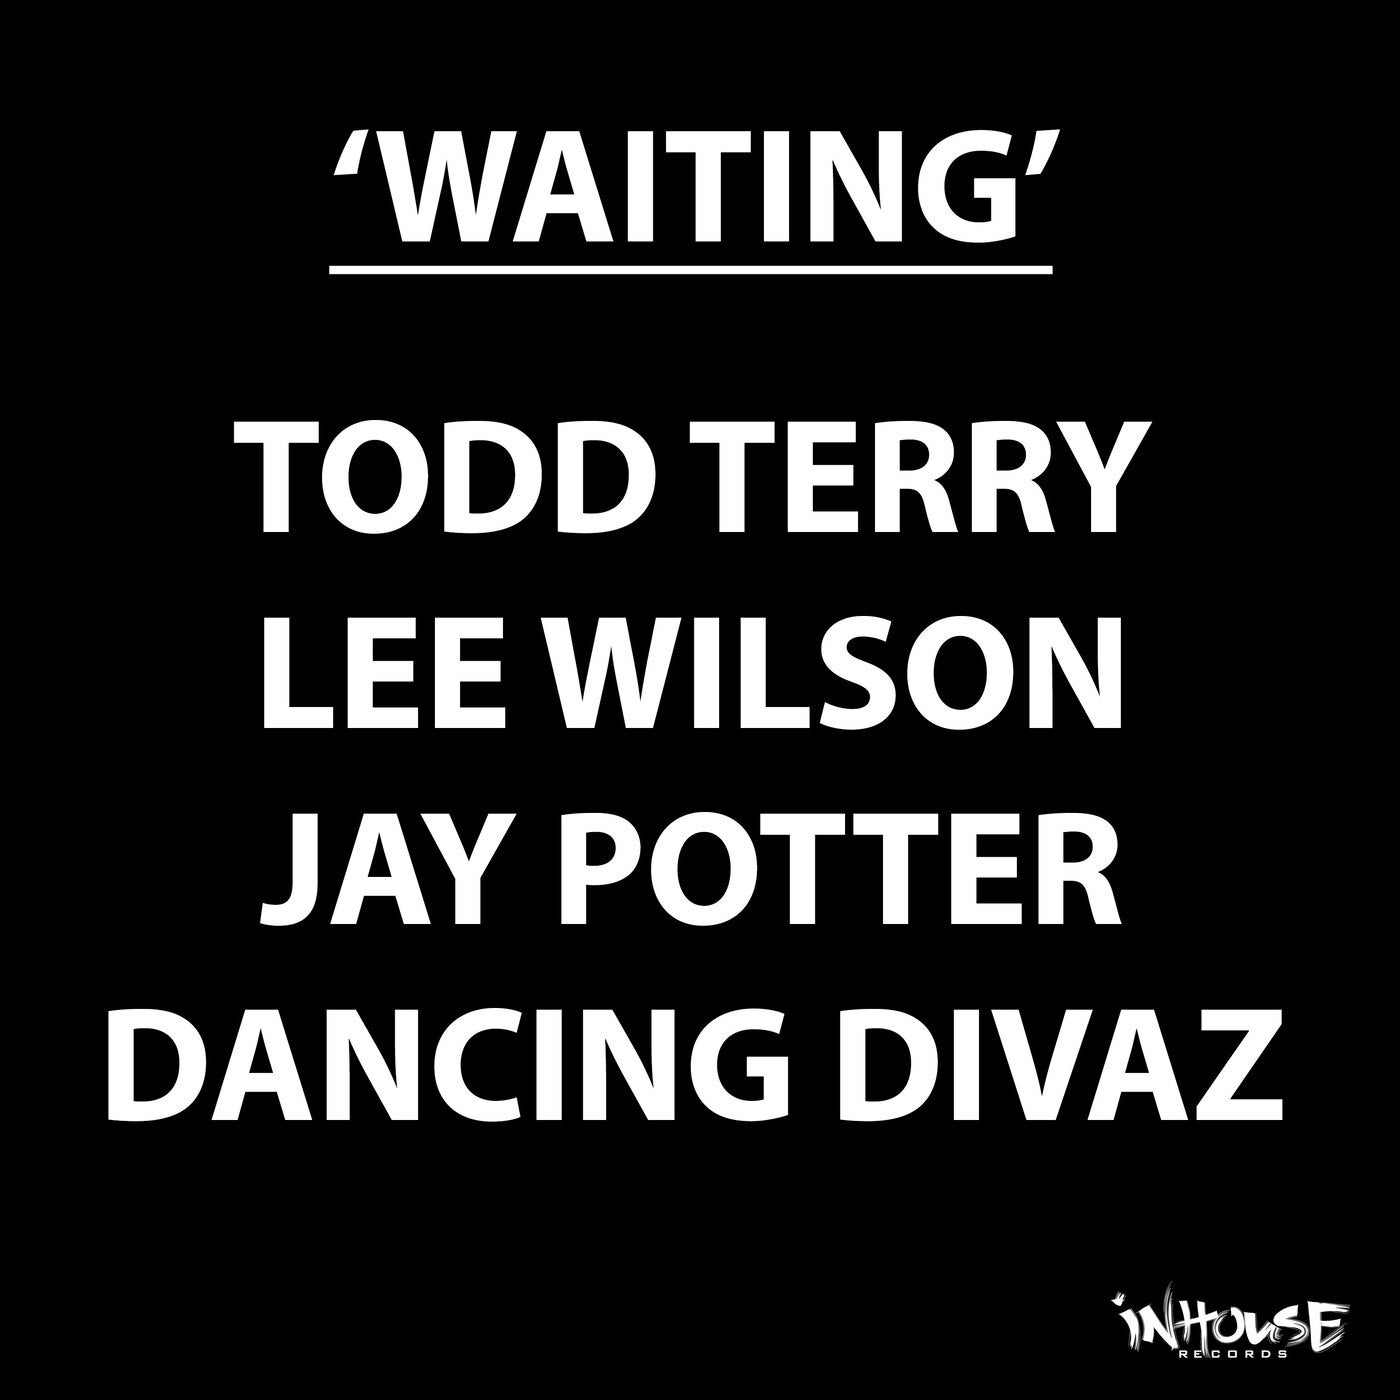 image cover: Todd Terry, Dancing Divaz, Lee Wilson, Jay Potter - Waiting / INHR765